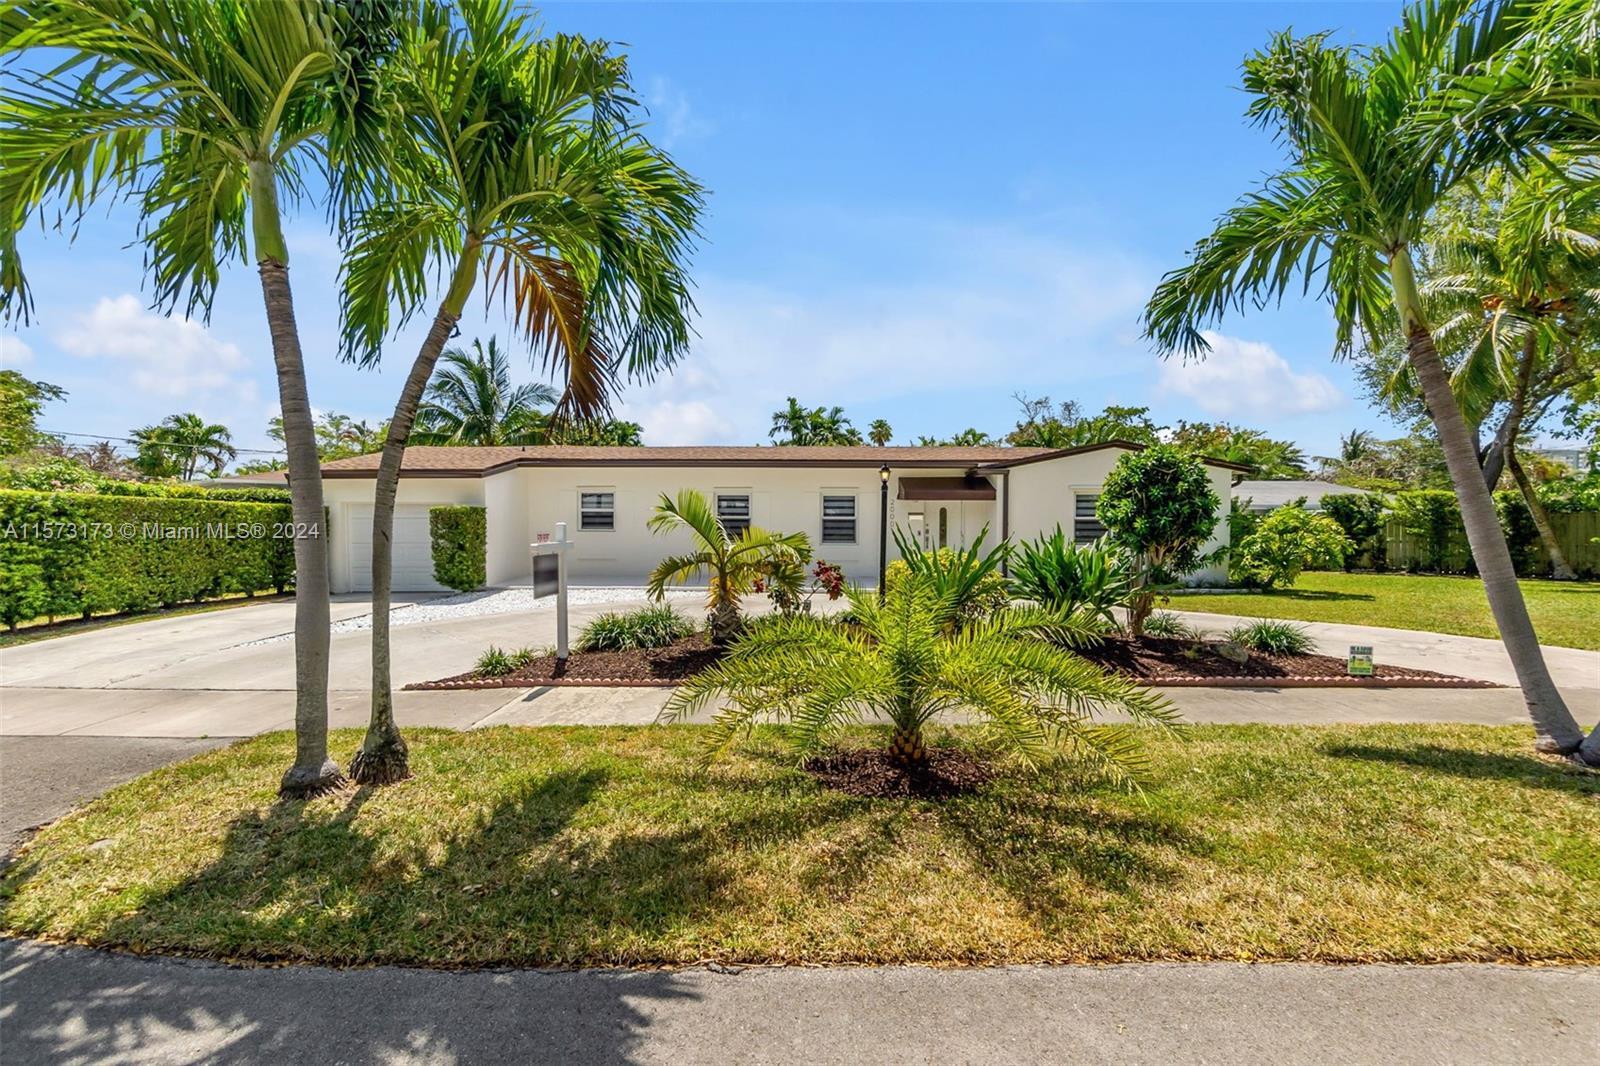 Photo of 2000 N Hibiscus Dr in North Miami, FL